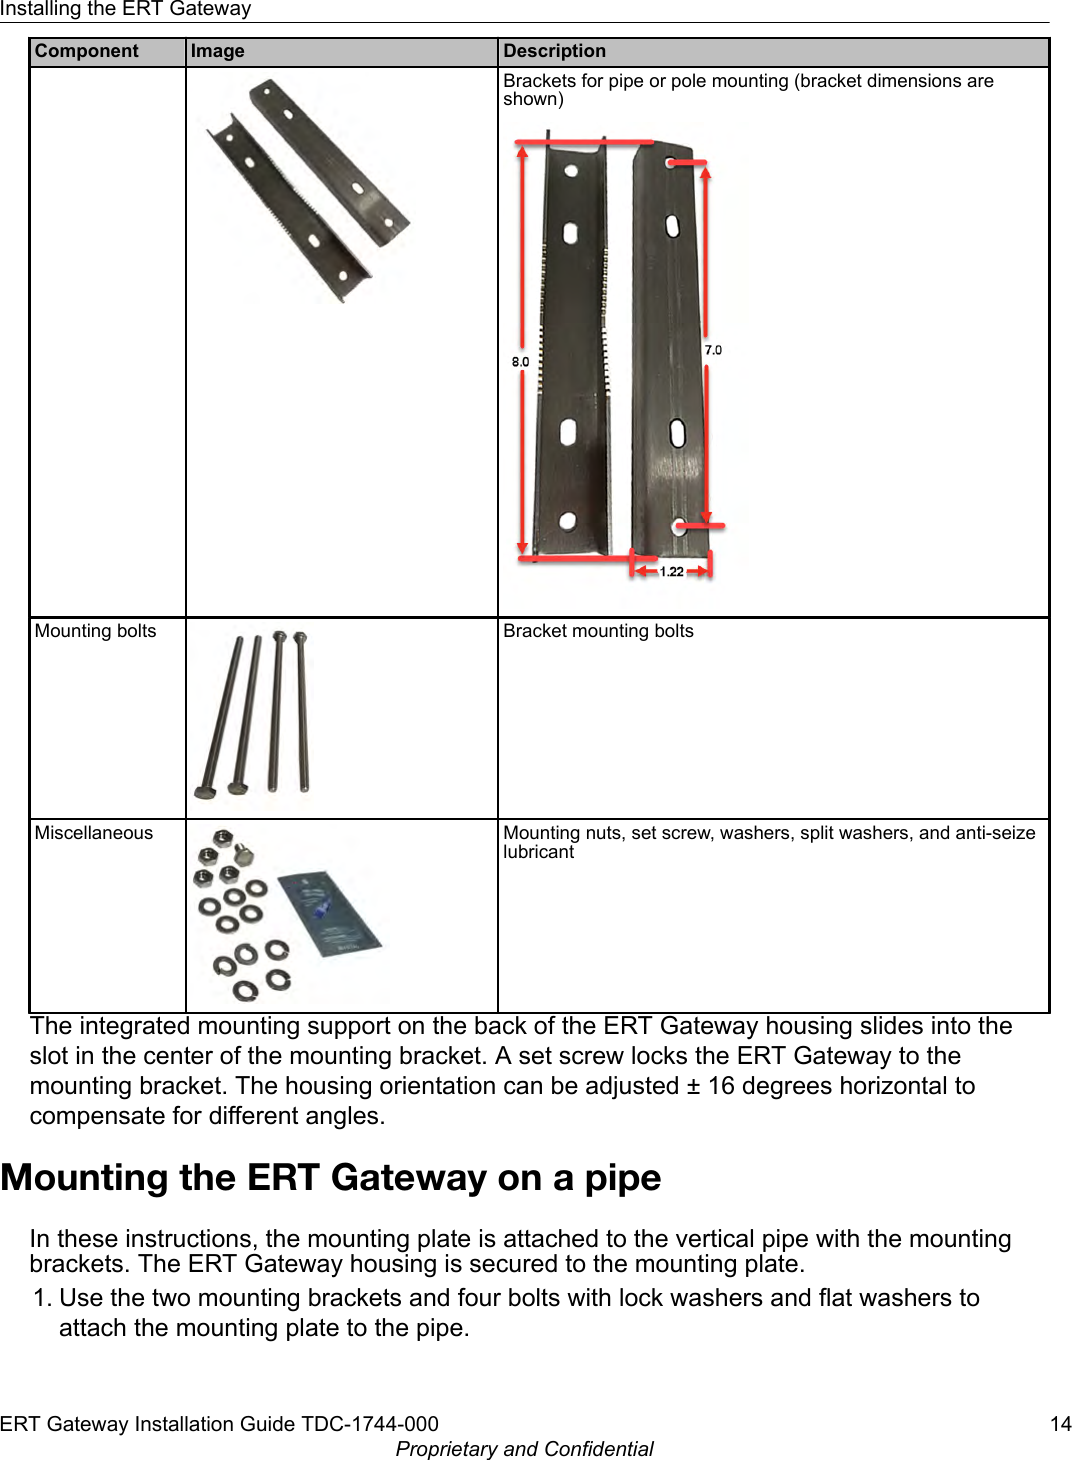 Component Image DescriptionBrackets for pipe or pole mounting (bracket dimensions areshown)Mounting bolts Bracket mounting boltsMiscellaneous Mounting nuts, set screw, washers, split washers, and anti-seizelubricantThe integrated mounting support on the back of the ERT Gateway housing slides into theslot in the center of the mounting bracket. A set screw locks the ERT Gateway to themounting bracket. The housing orientation can be adjusted ± 16 degrees horizontal tocompensate for different angles.Mounting the ERT Gateway on a pipeIn these instructions, the mounting plate is attached to the vertical pipe with the mountingbrackets. The ERT Gateway housing is secured to the mounting plate.1. Use the two mounting brackets and four bolts with lock washers and flat washers toattach the mounting plate to the pipe.Installing the ERT GatewayERT Gateway Installation Guide TDC-1744-000 14Proprietary and Confidential